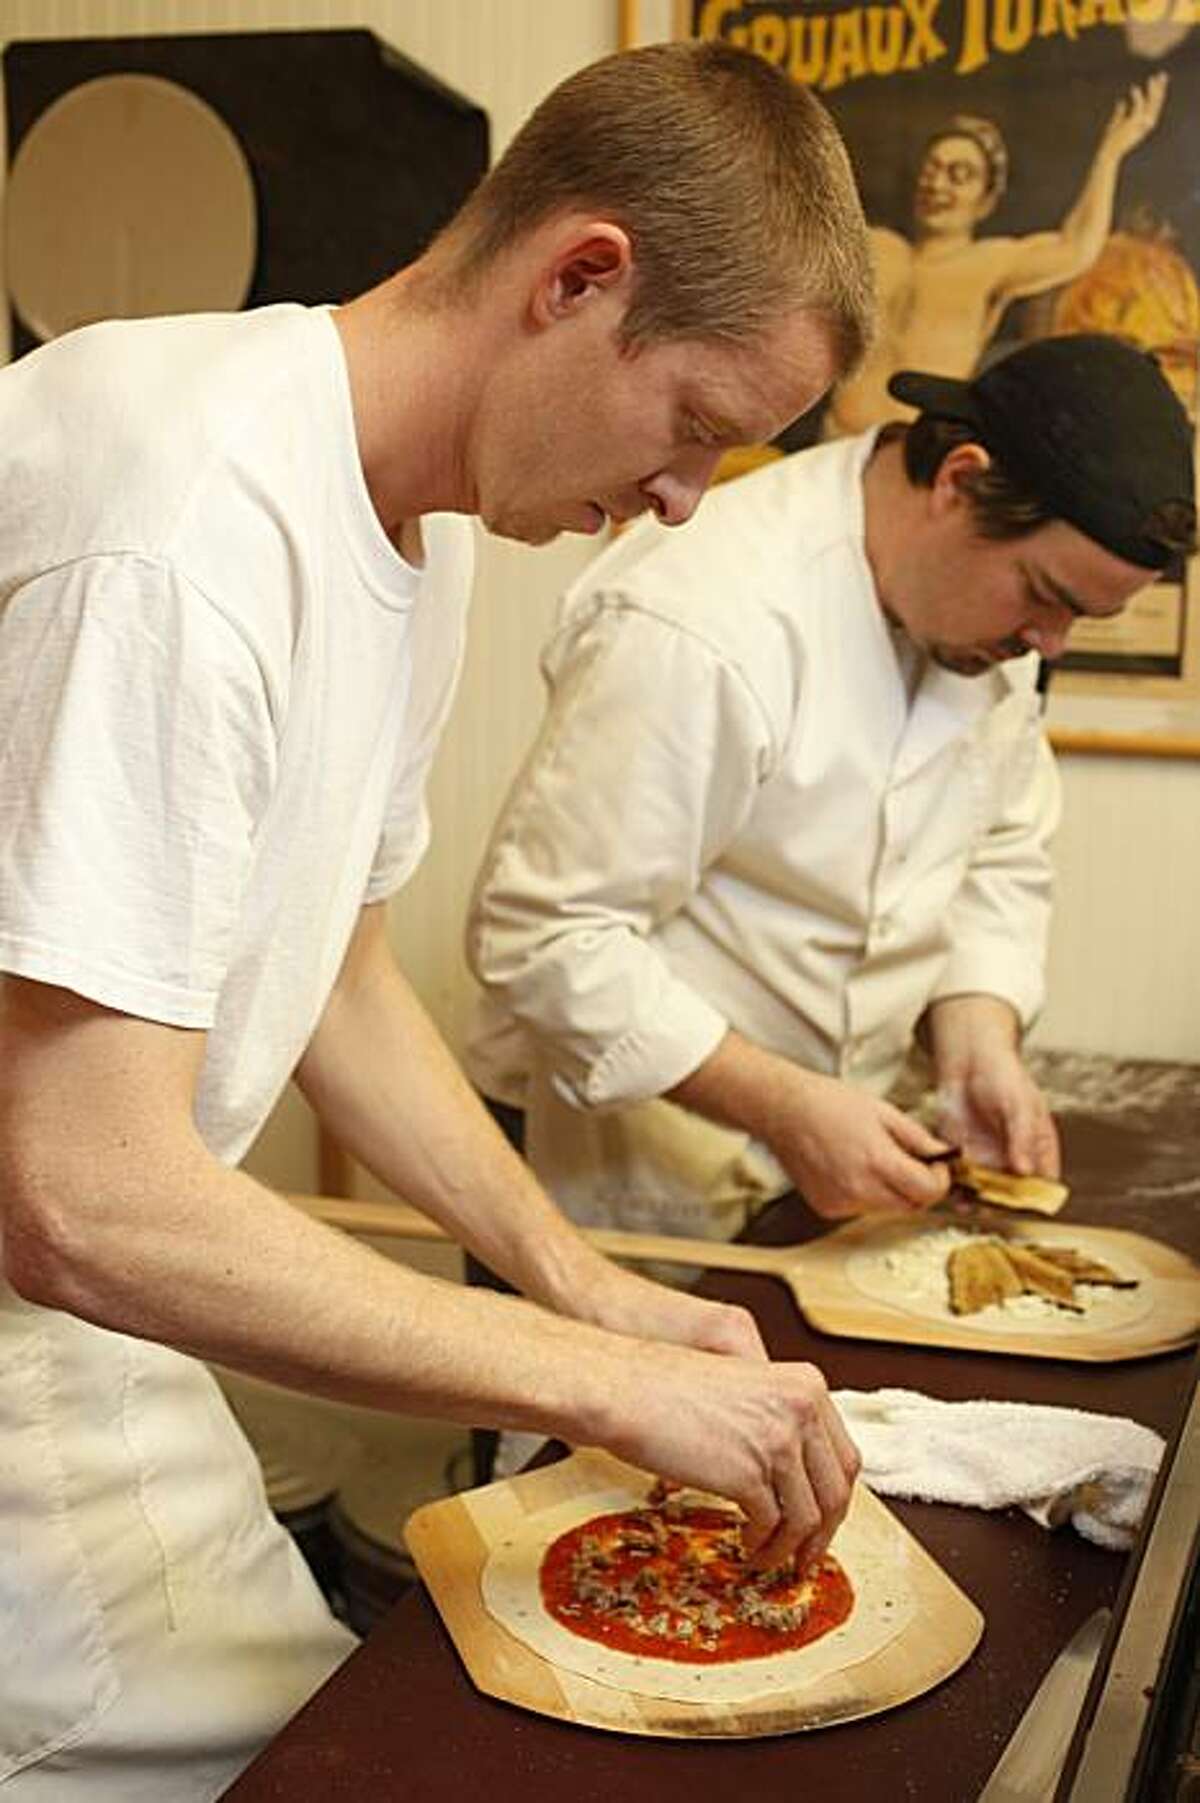 Kyle Rempp (left) and Aaron Welge (right), making pizza at Fort Bragg Bakery, 360 N. Franklin Street in Fort Bragg, Calif., on December 30, 2009.